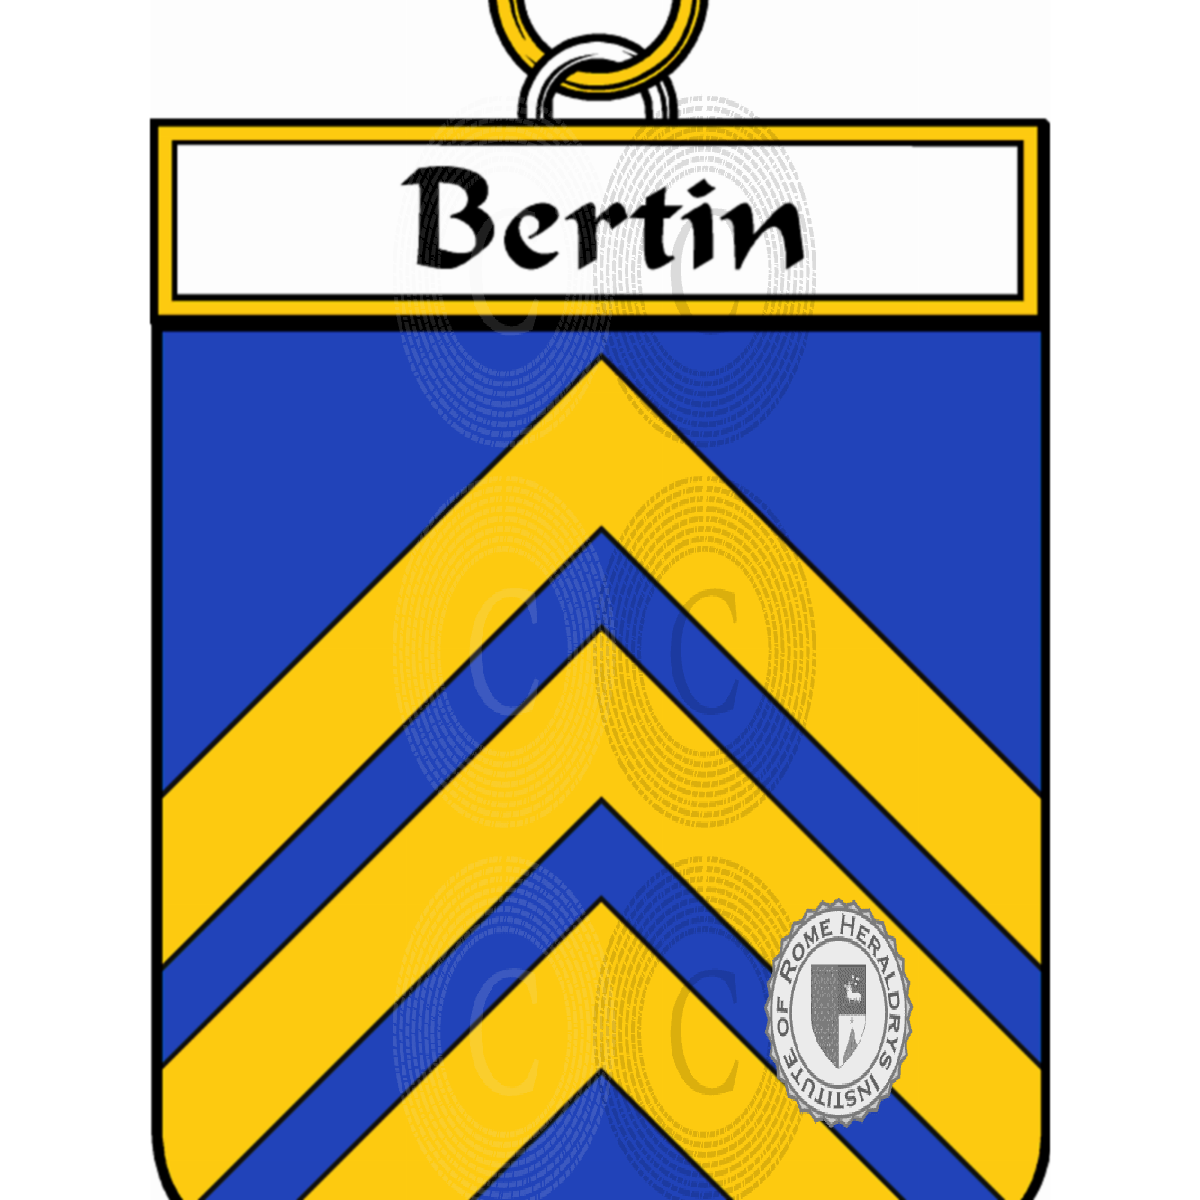 Bertin Name Meaning, Family History, Family Crest & Coats of Arms